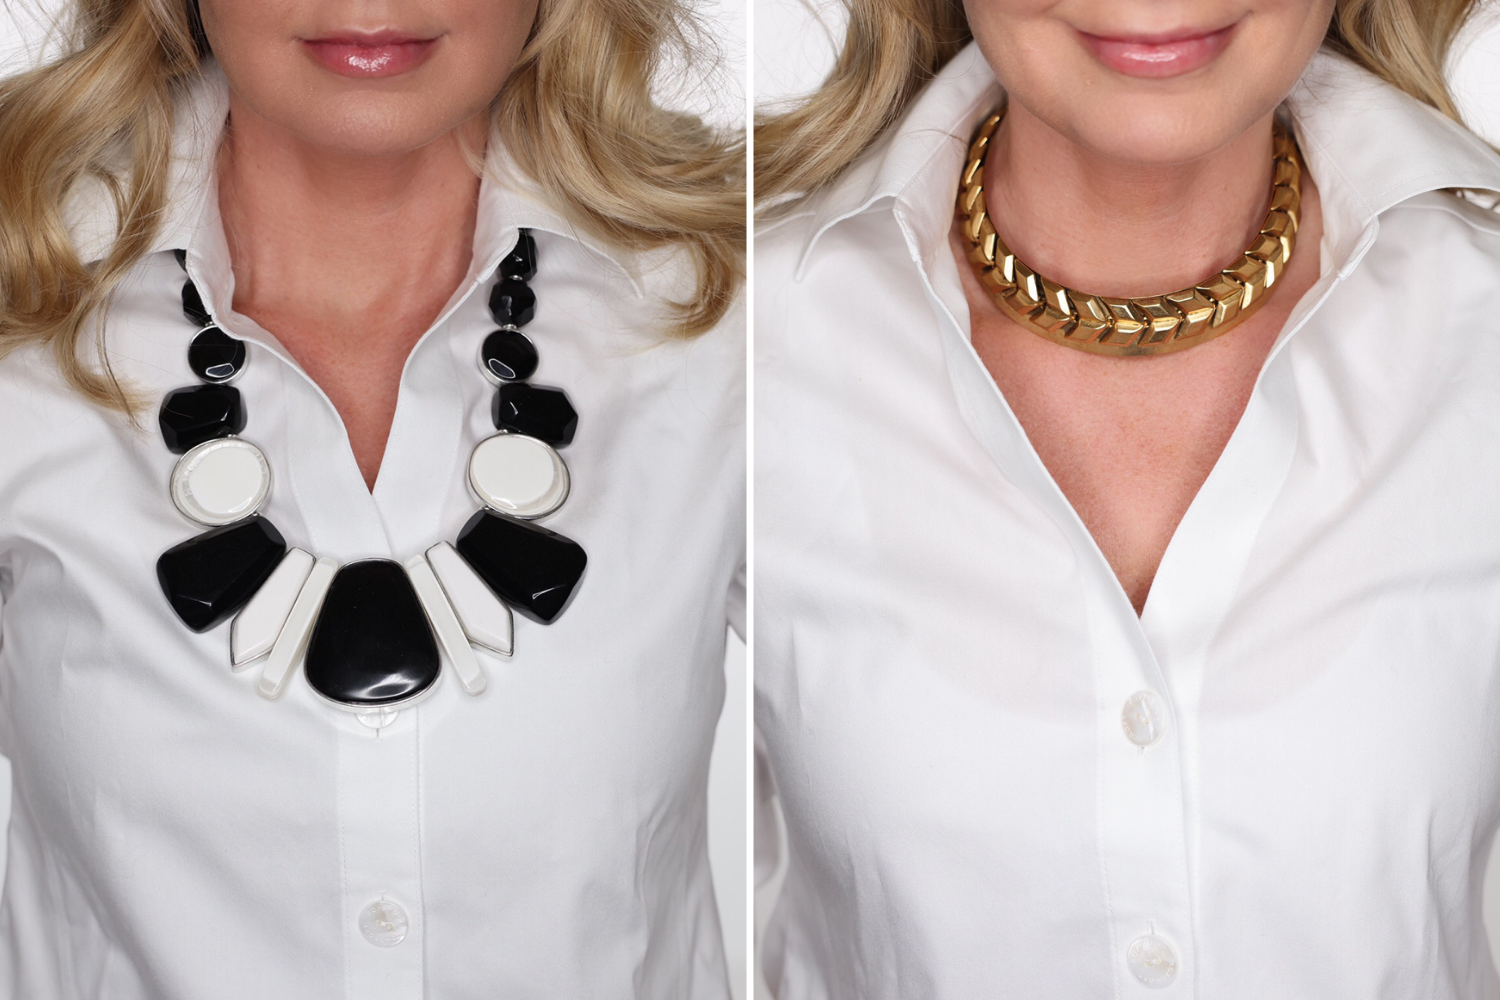 Make Tasteful Jewelry Choices | How to Look Younger & Slimmer